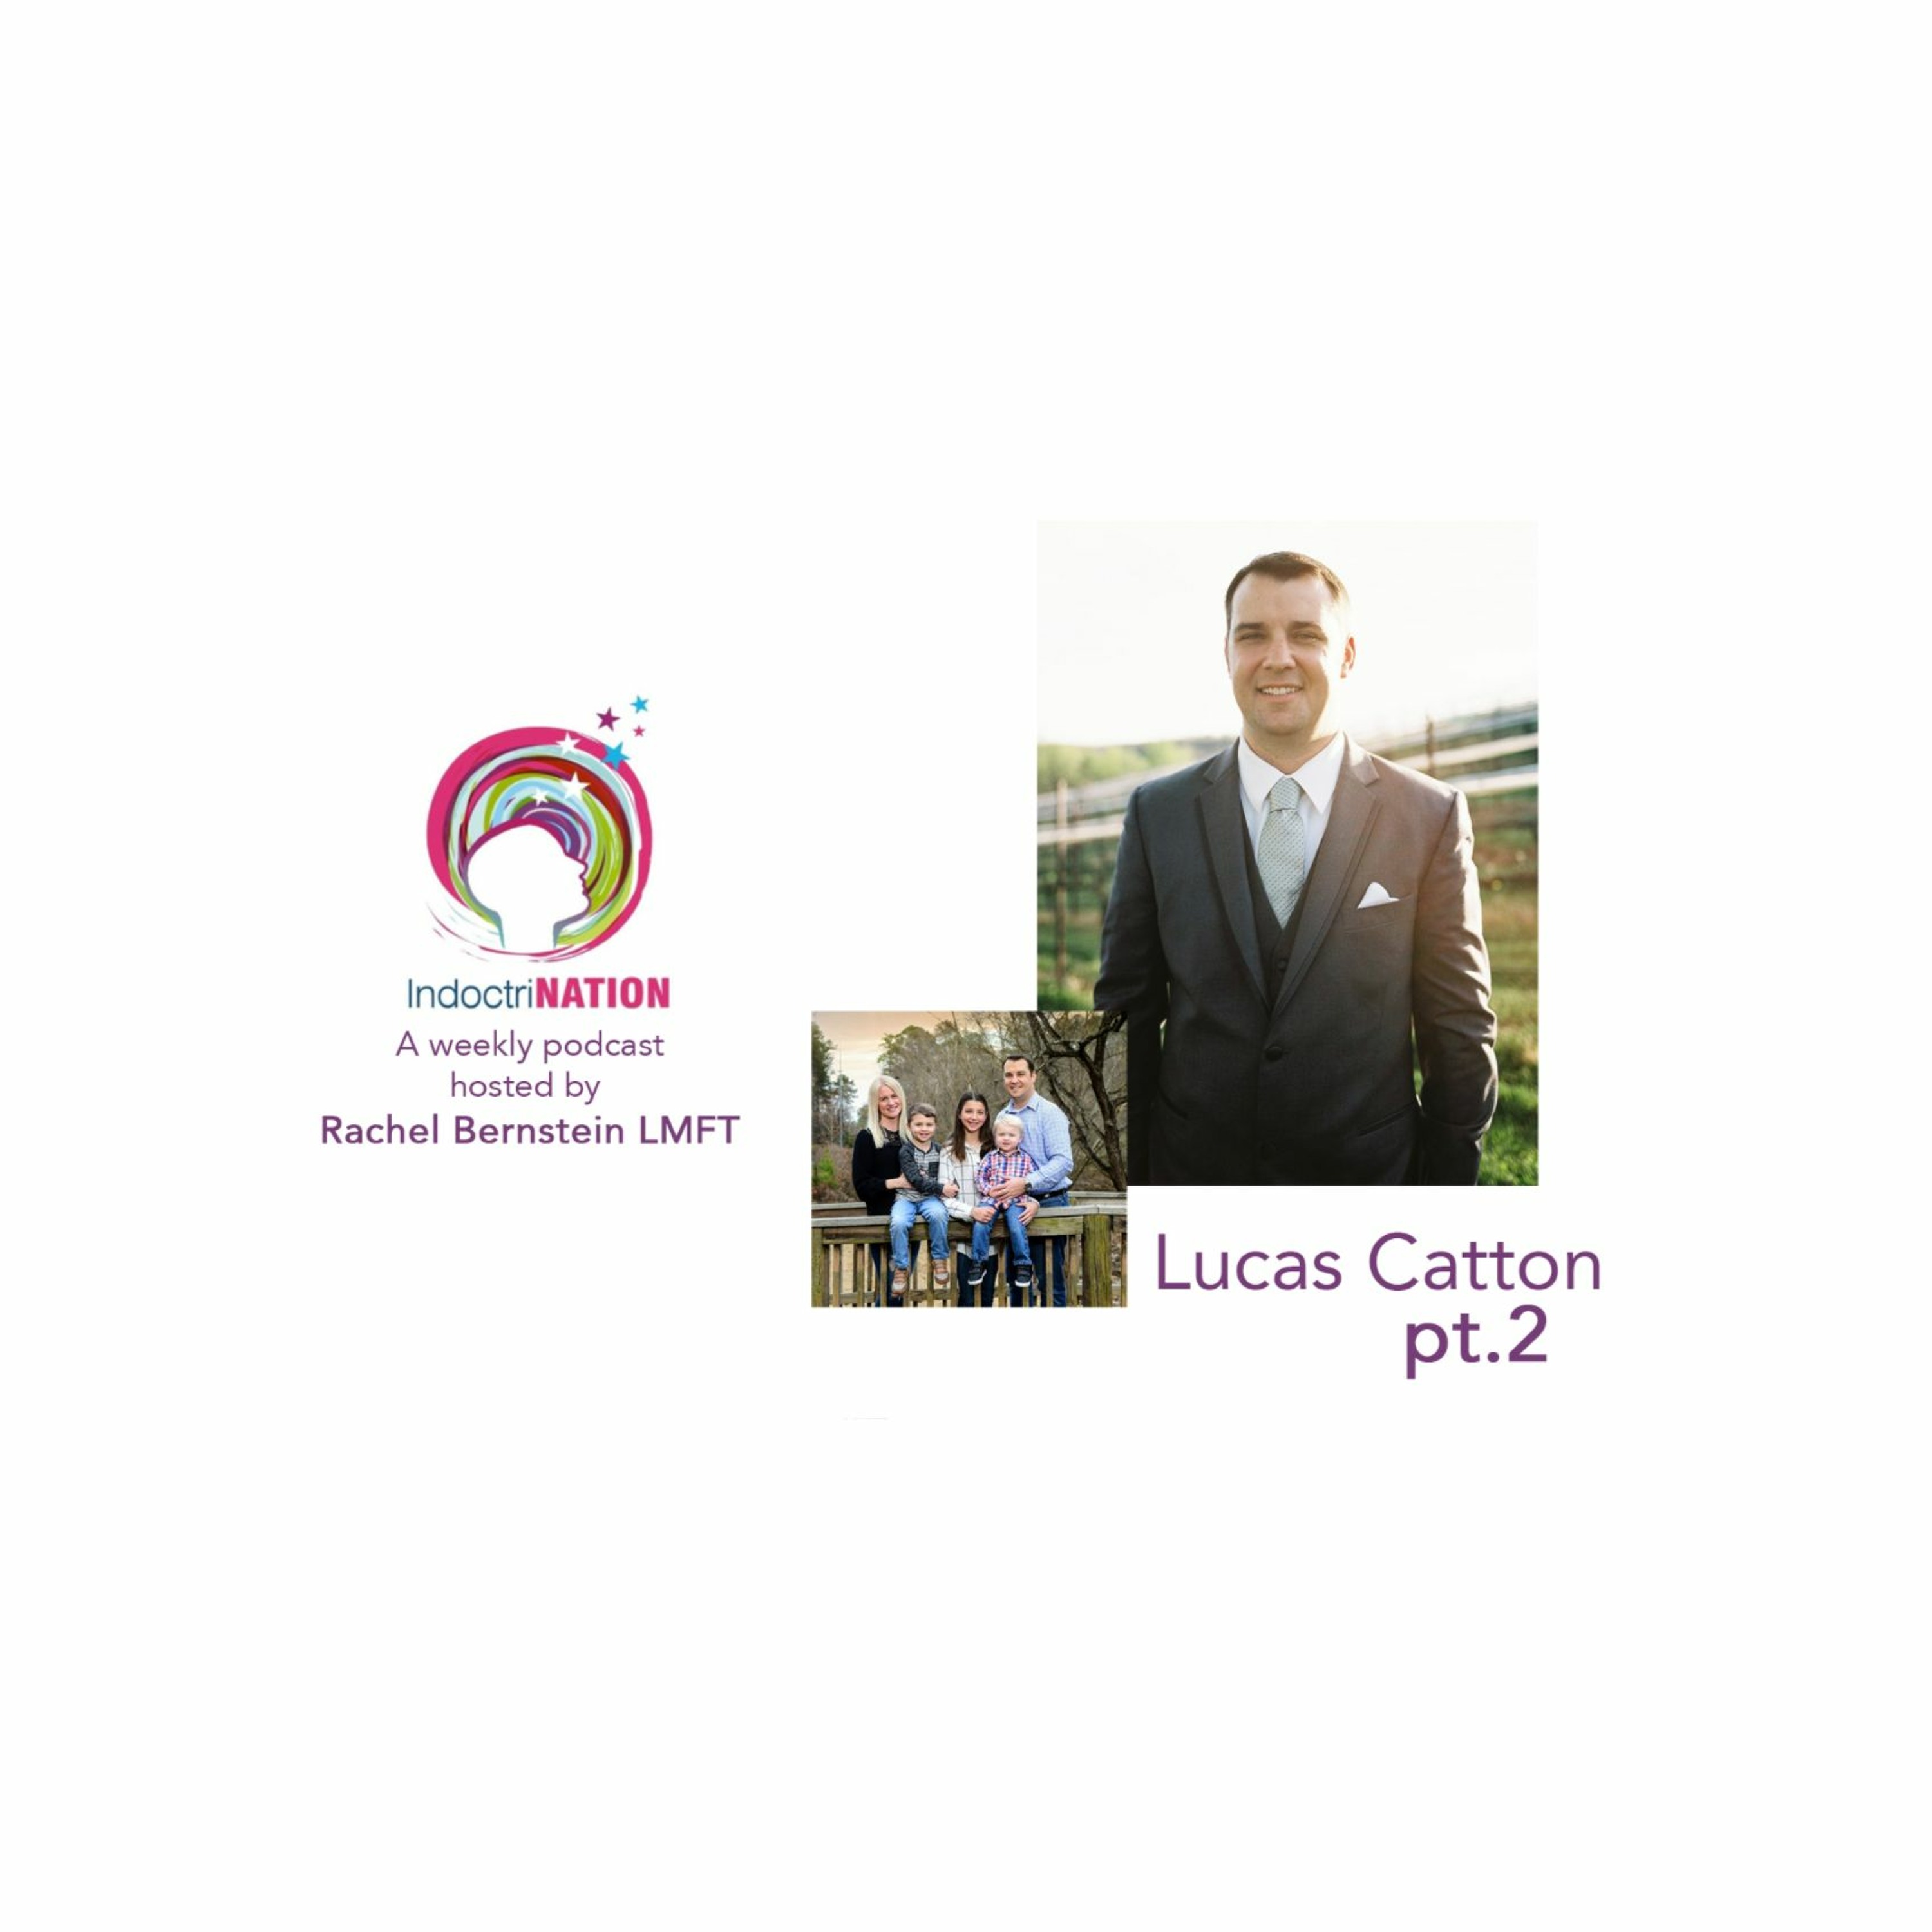 A Passion for Saving People w/ Lucas Catton, ex-President of Narconon - S5E11pt2